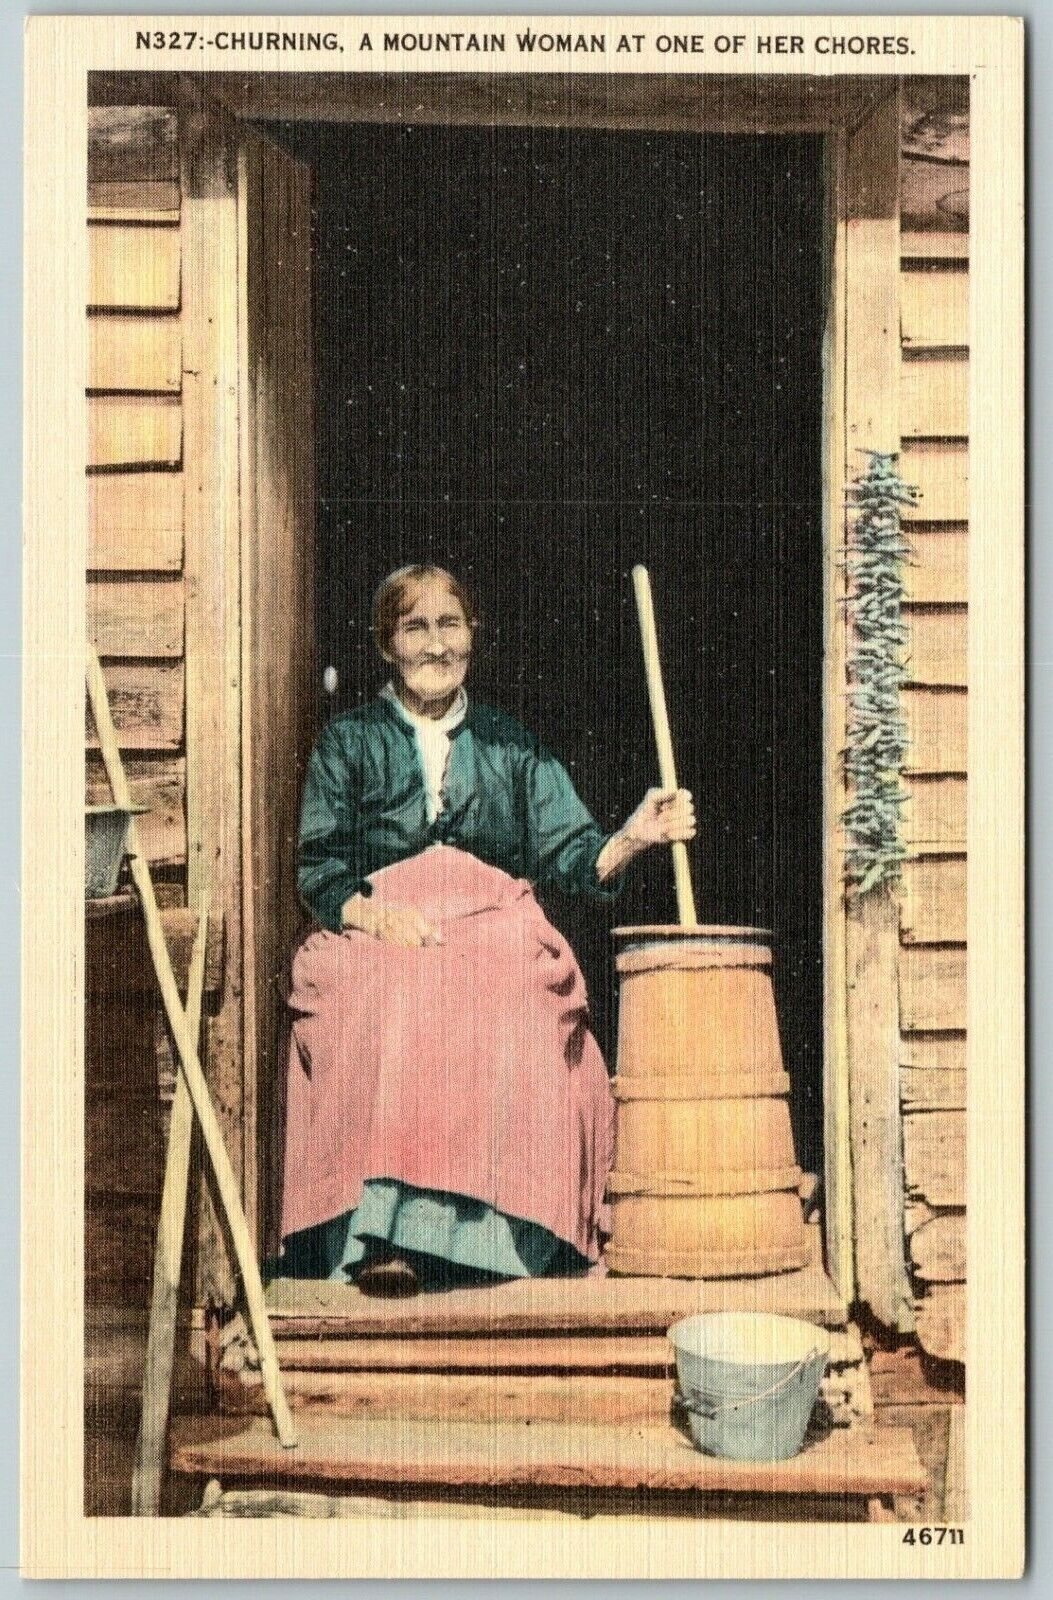 Churning, A Mountain Woman At One of Her Chores - Postcard